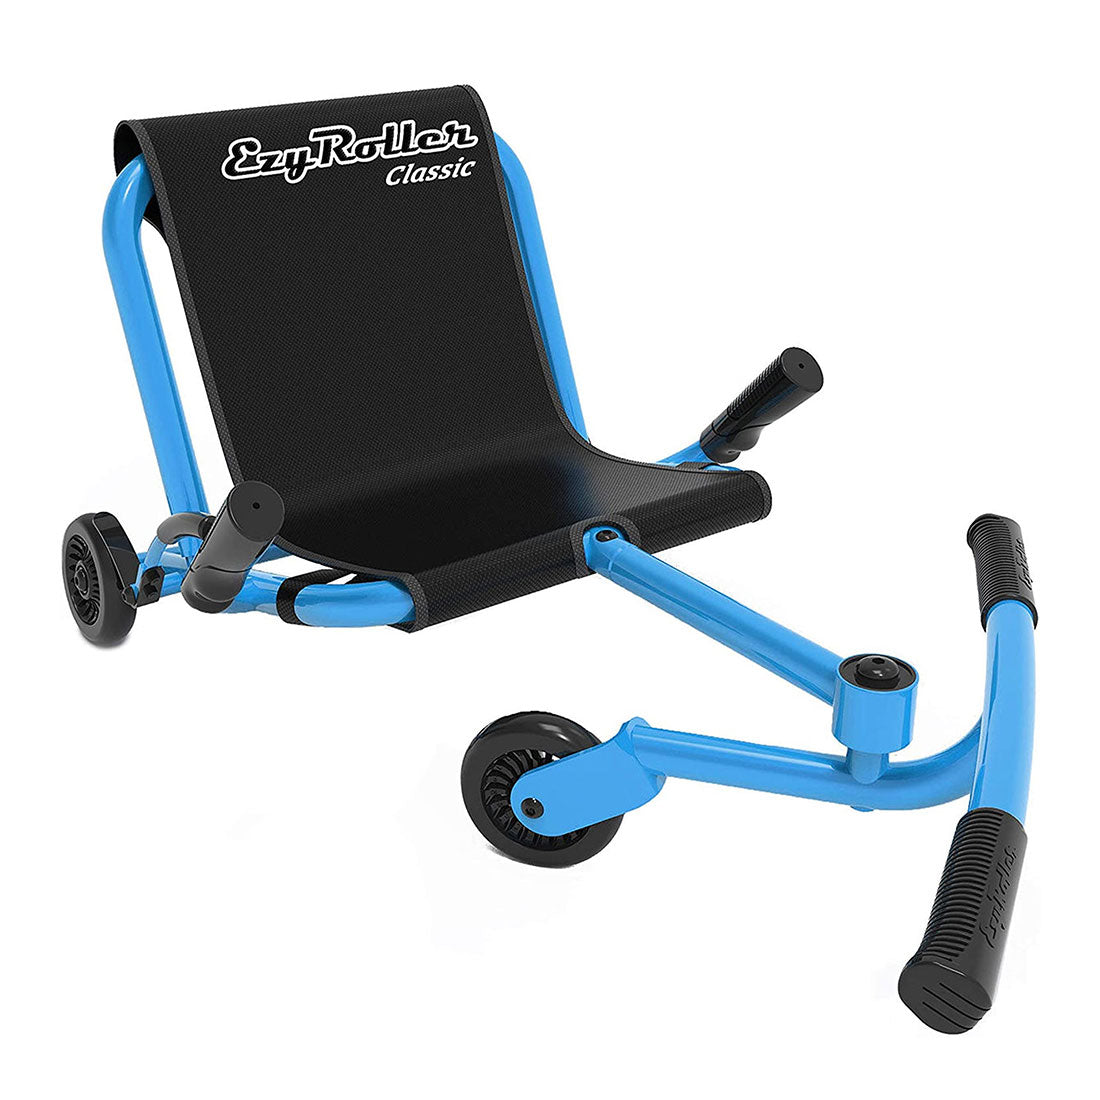 EzyRoller Classic - Blue Other Fun Toys